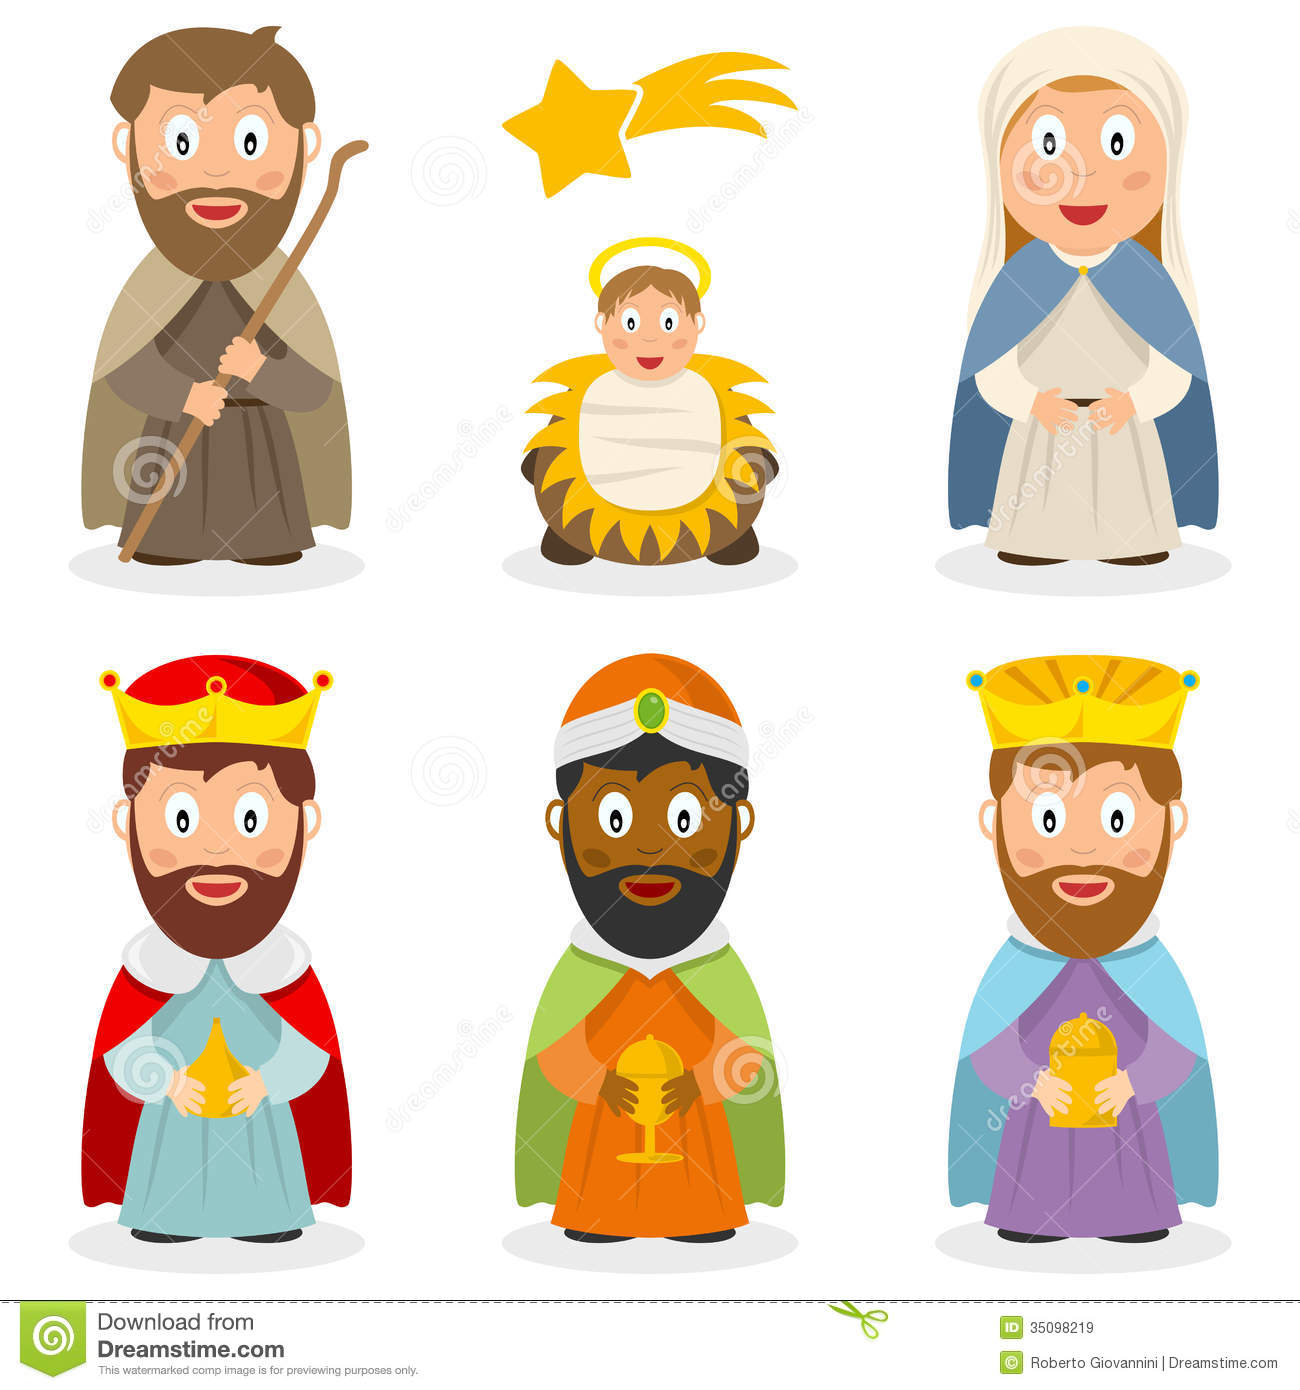 Collection Of Cartoon Characters Representing The Holy Family  Joseph